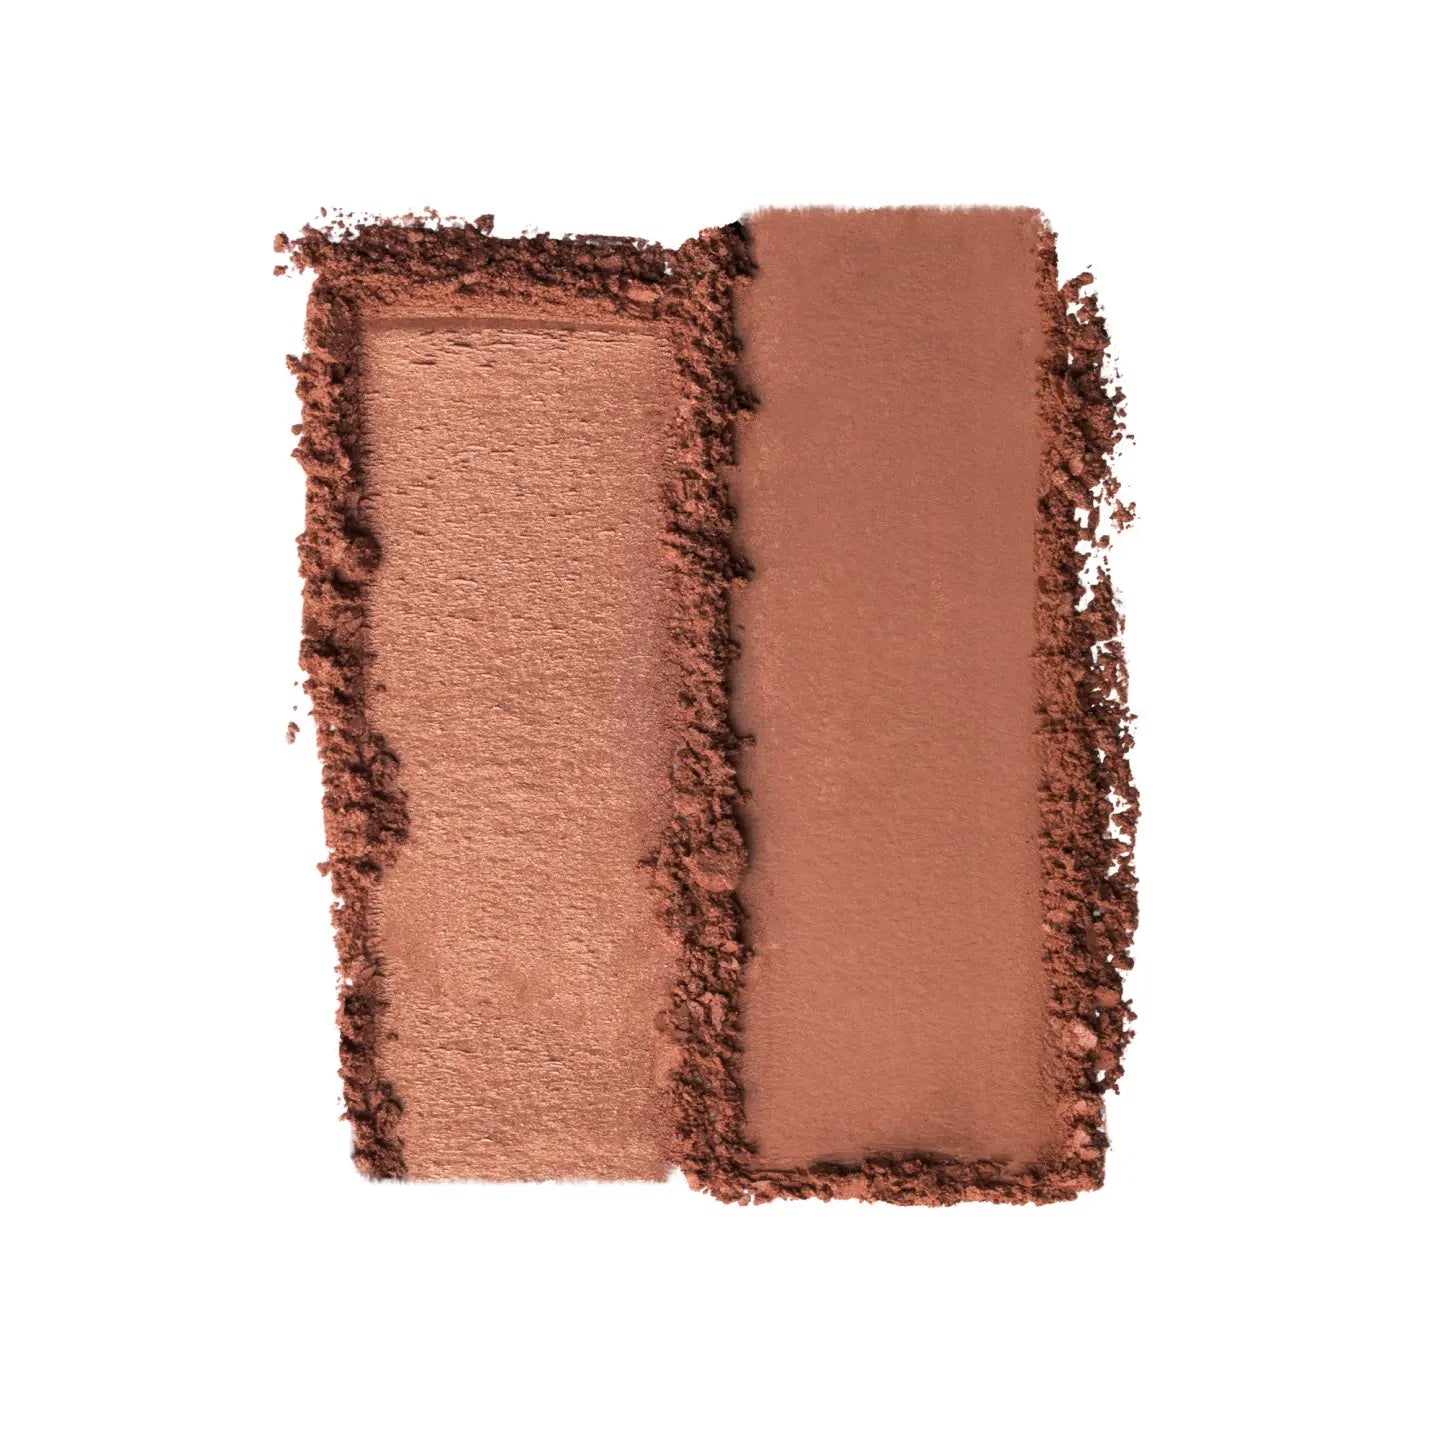 Selected: FEELIN' CHEEKY STARS ALIGNED Clean Amplifying Blush Duo